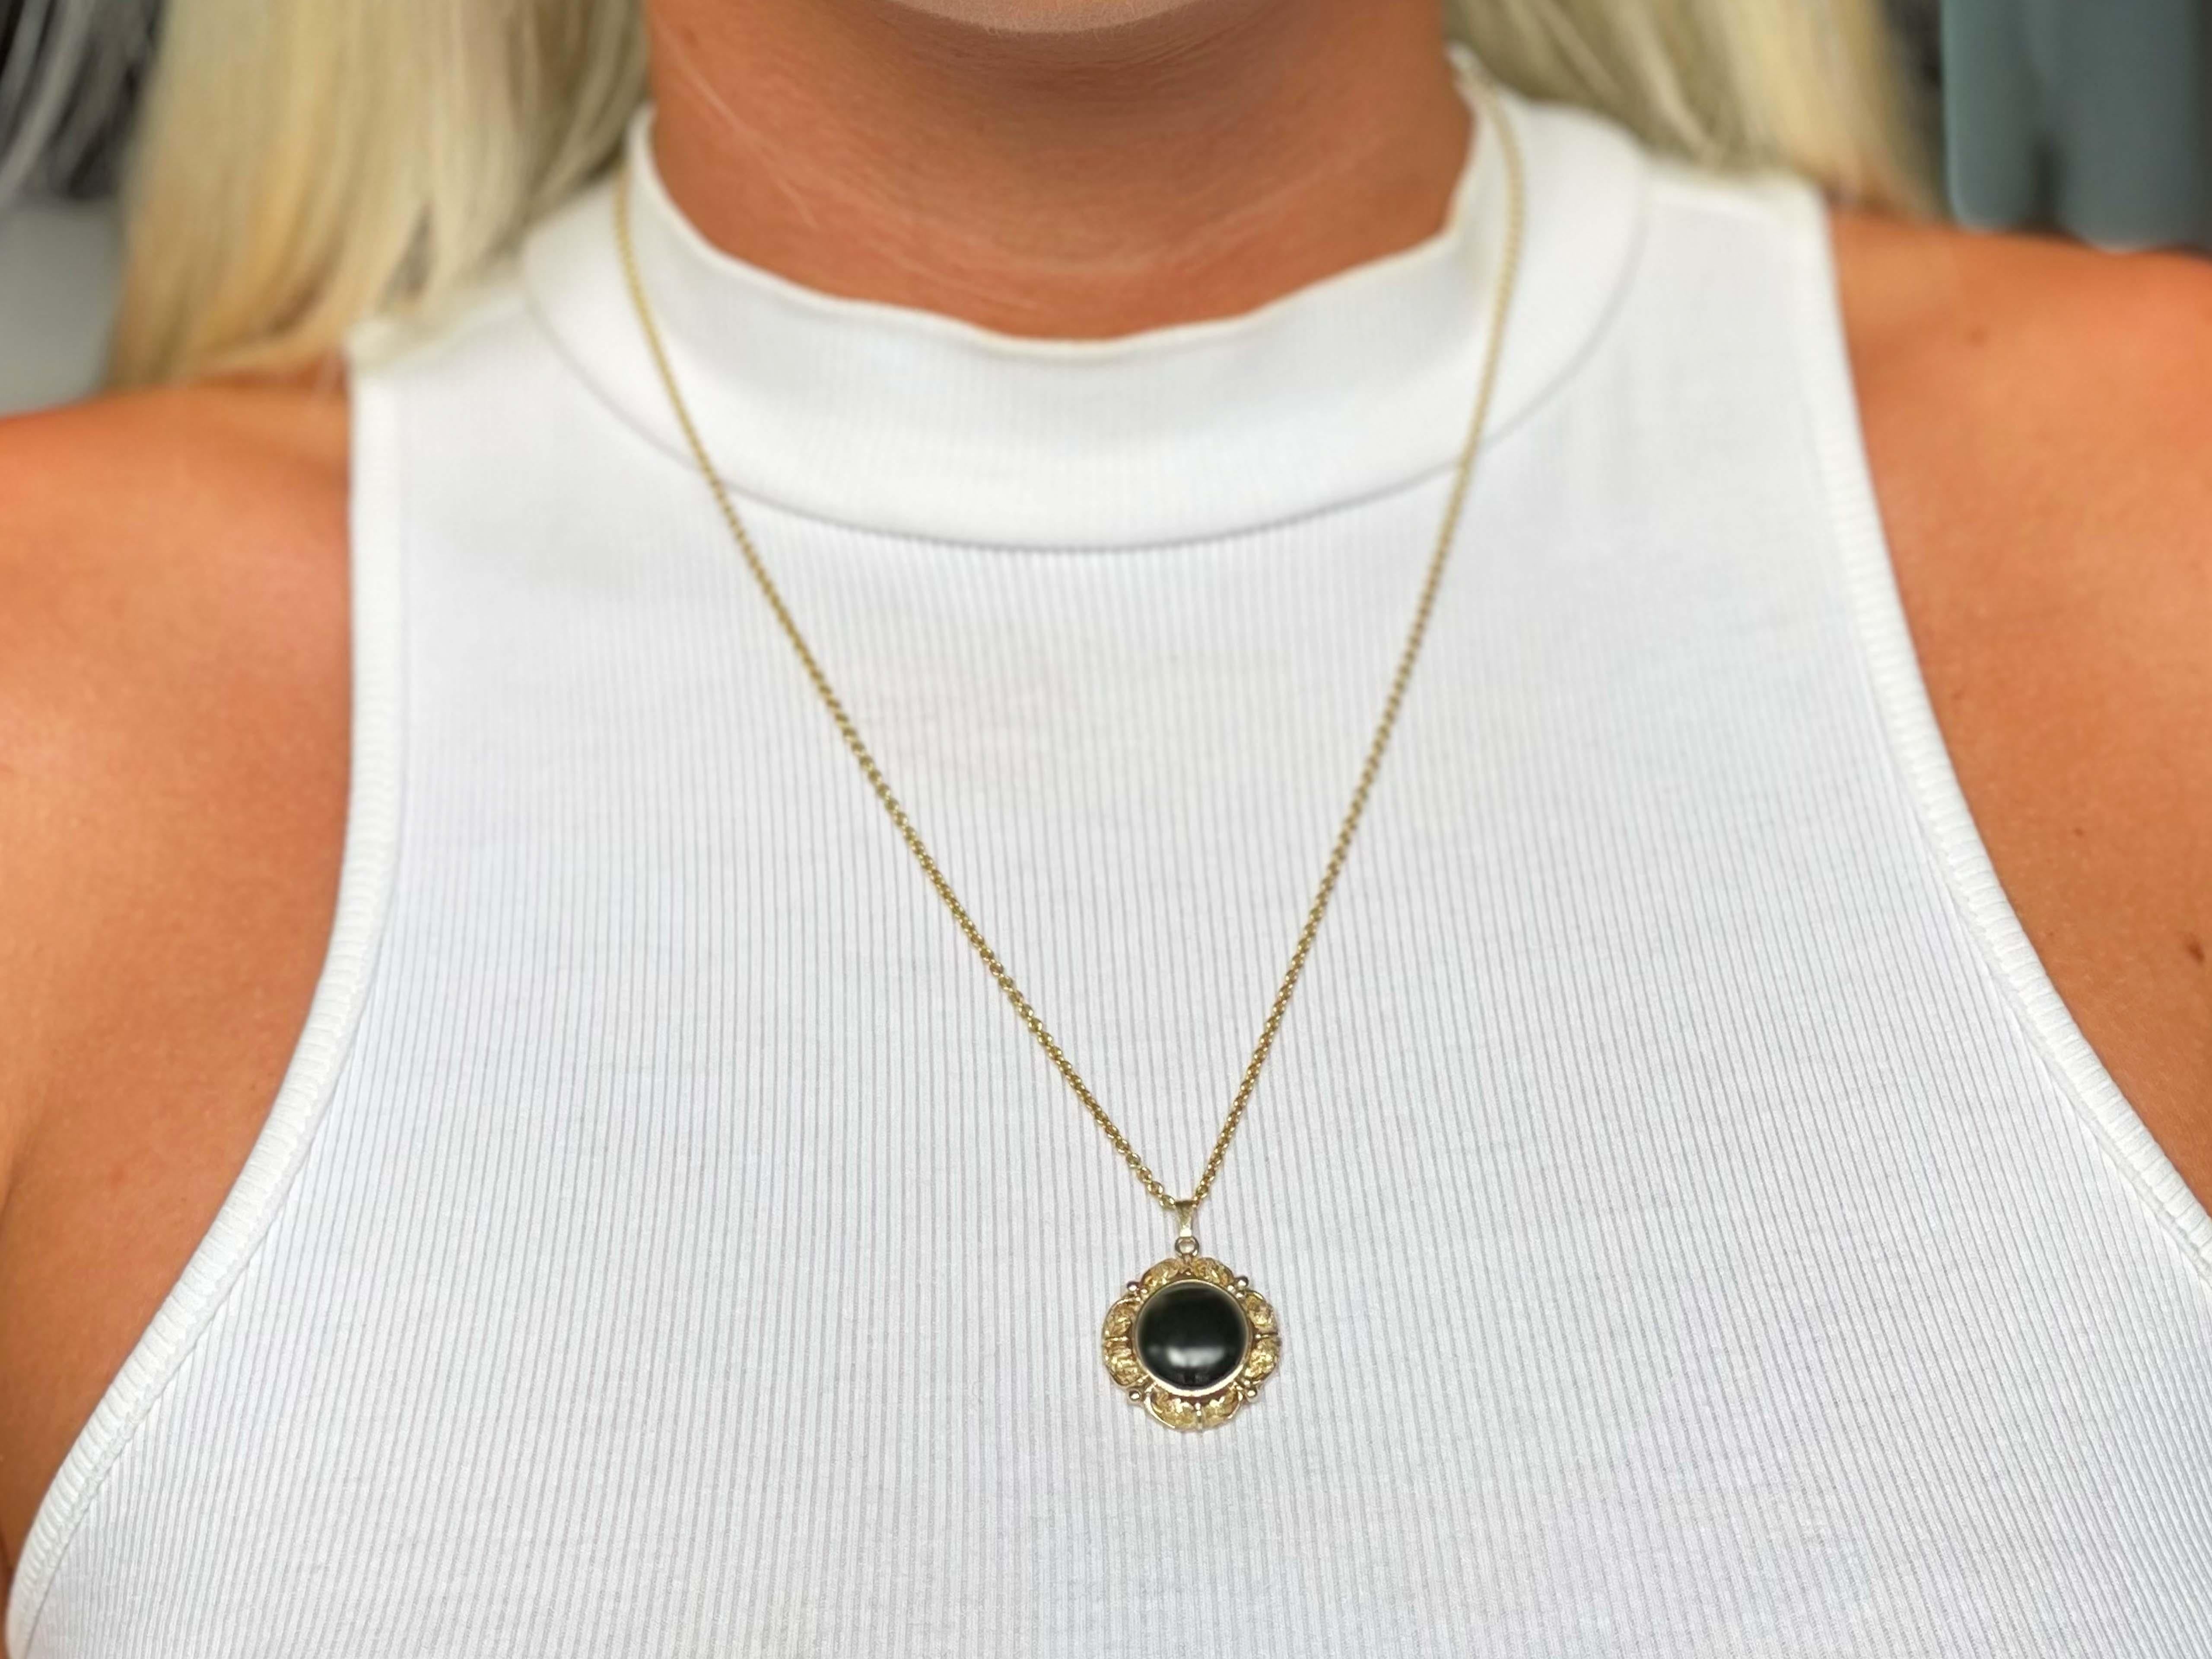 Black Jade Pendant in 14k Yellow Gold. The jade is bezel set surrounded by a botanical leaf design. Stamped 